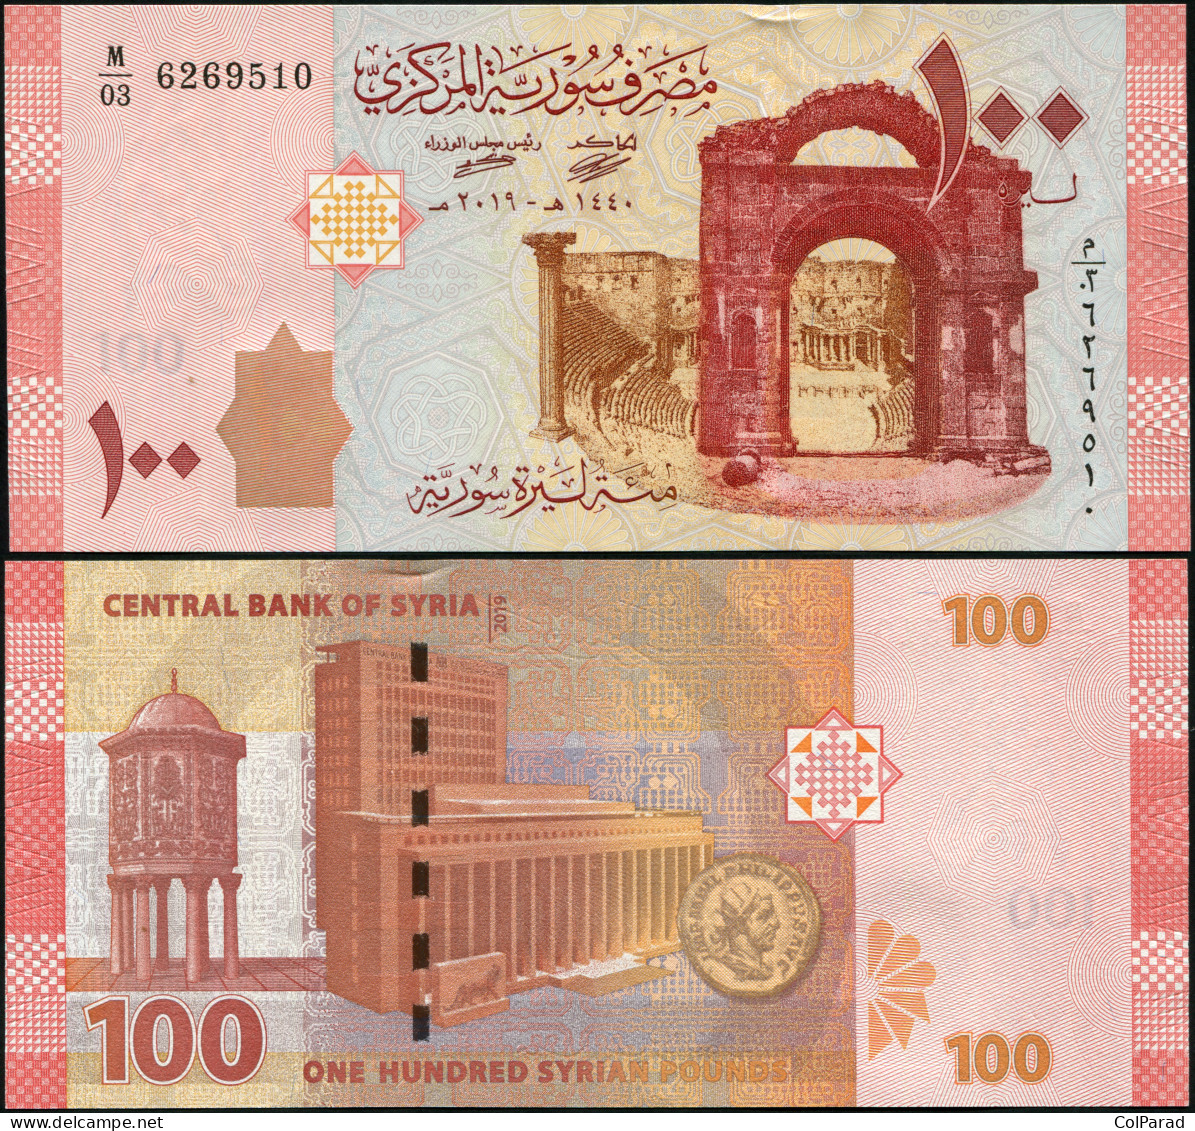 SYRIA 100 SYRIAN POUNDS - 2019 - Paper Unc - P.NL Banknote - Syrien